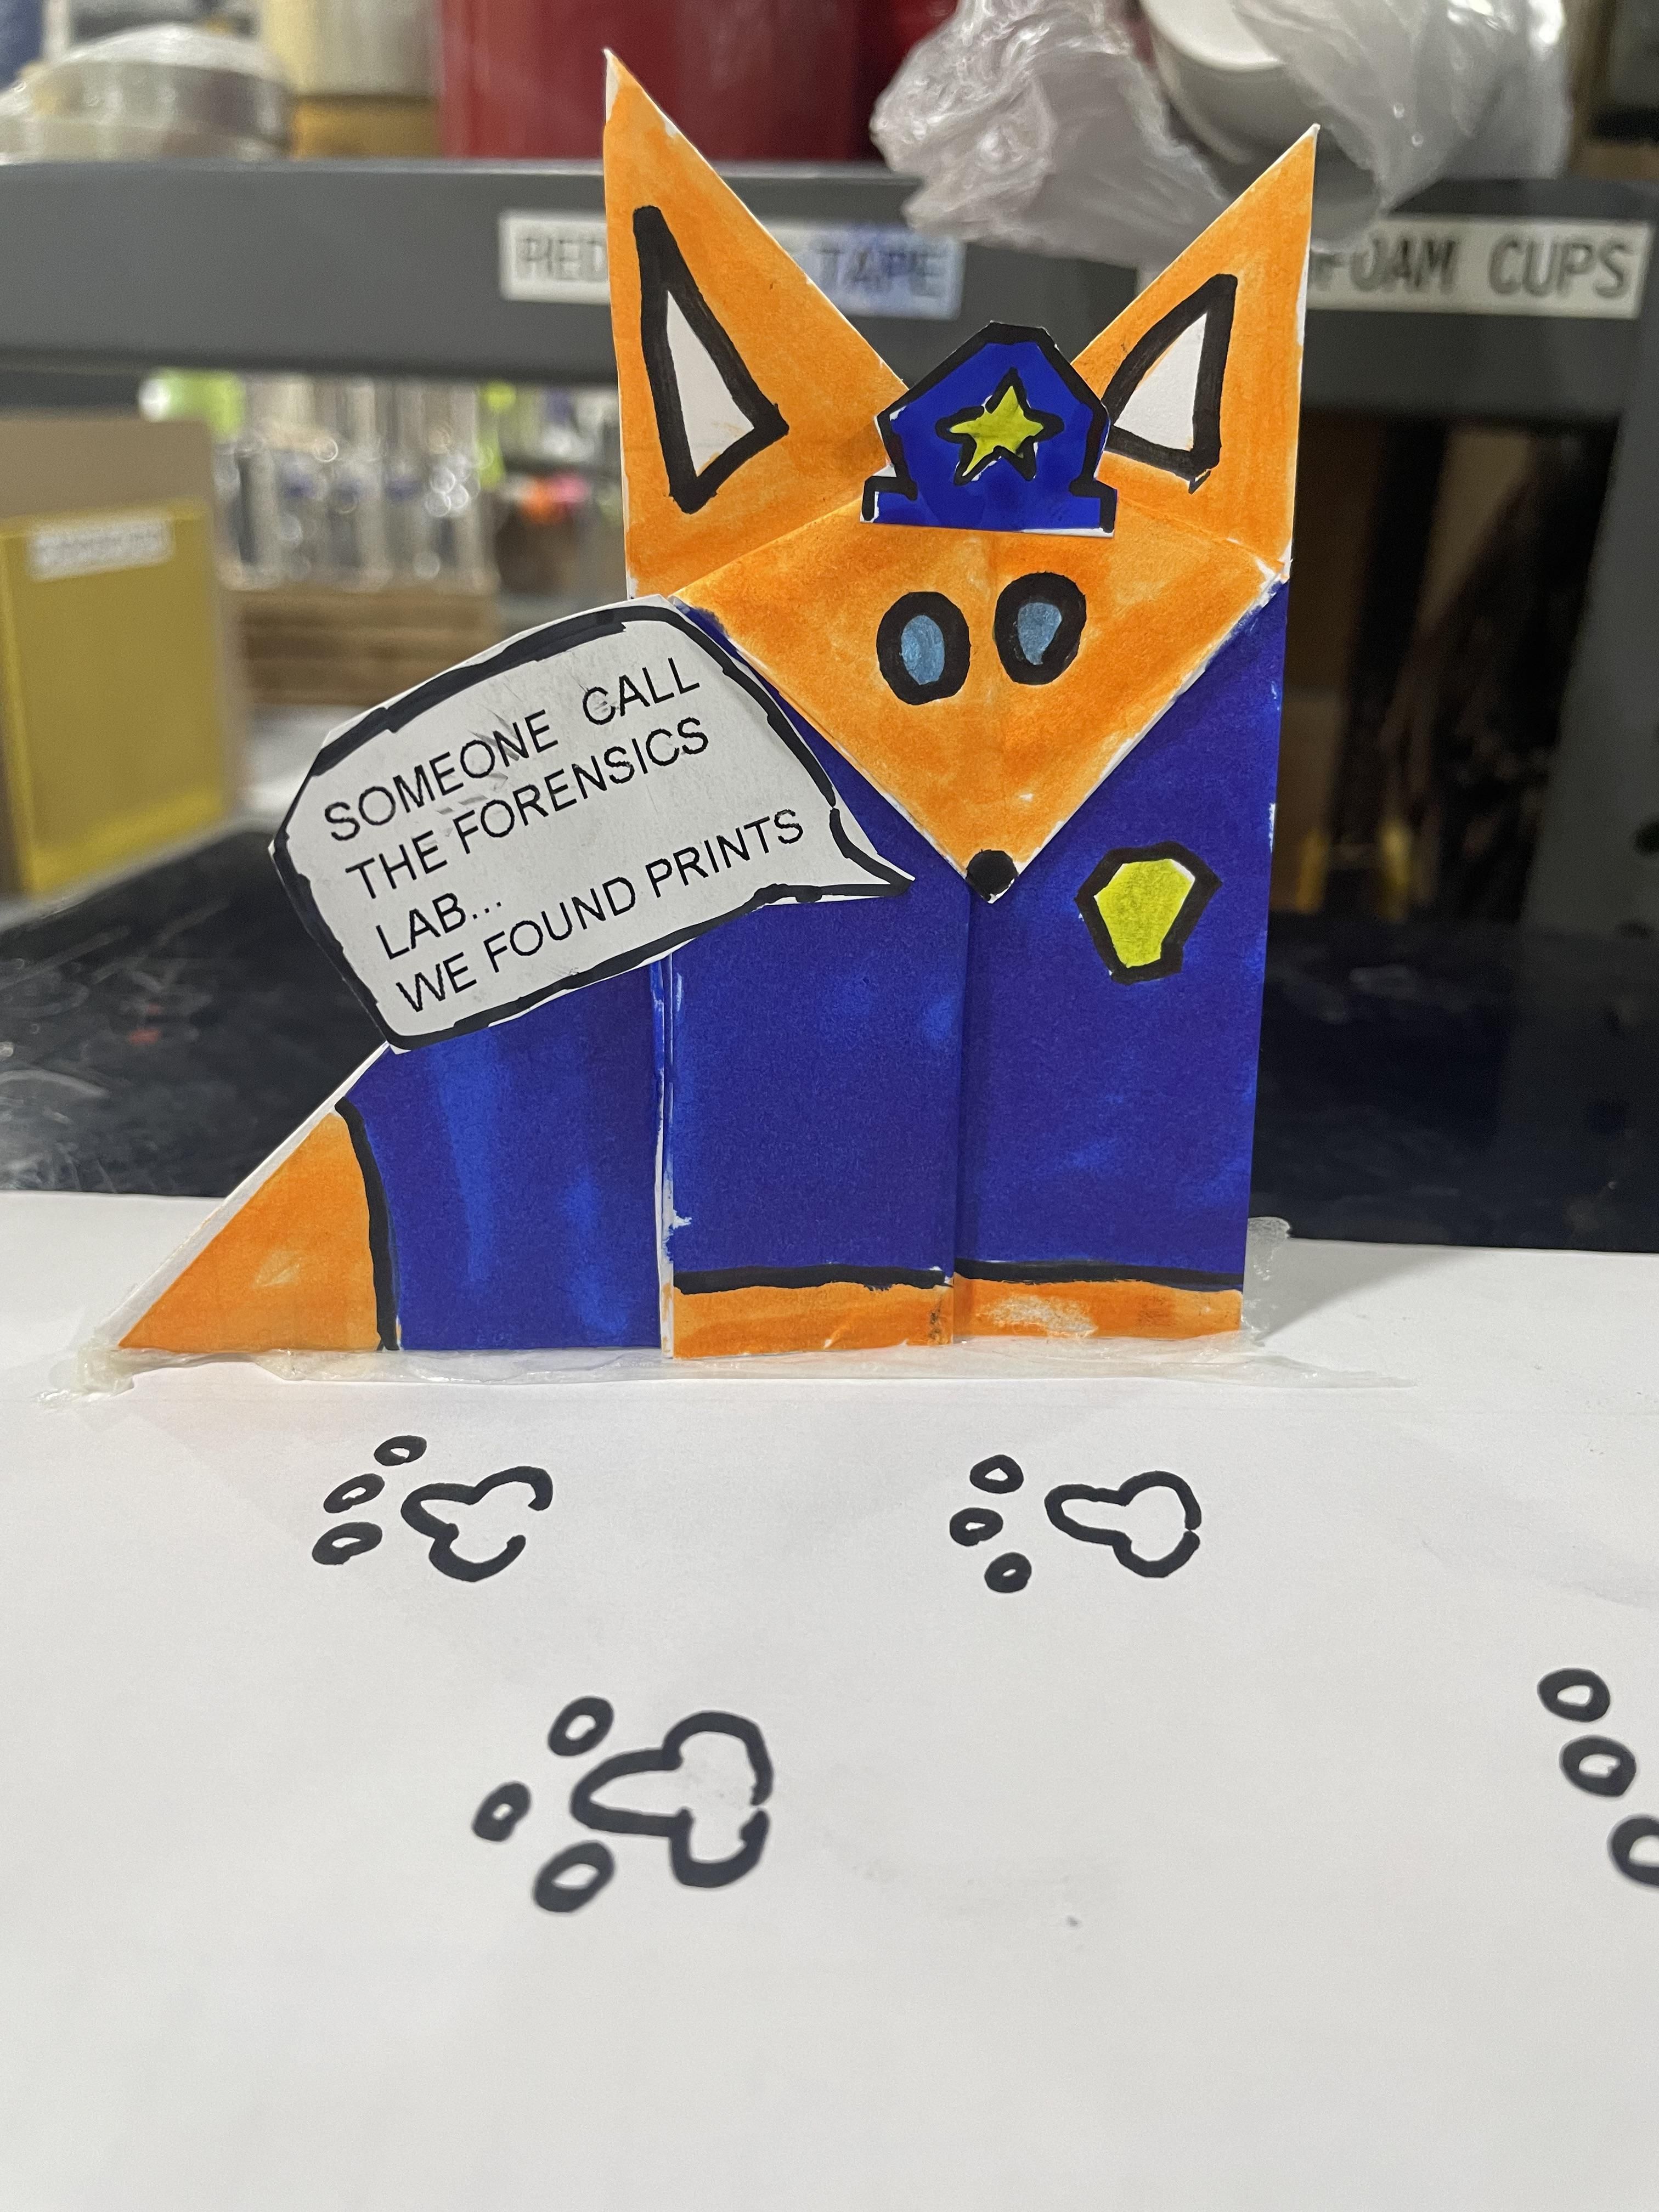 Someone at work keeps destroying my origami foxes. I figured it was time to involve the authorities.